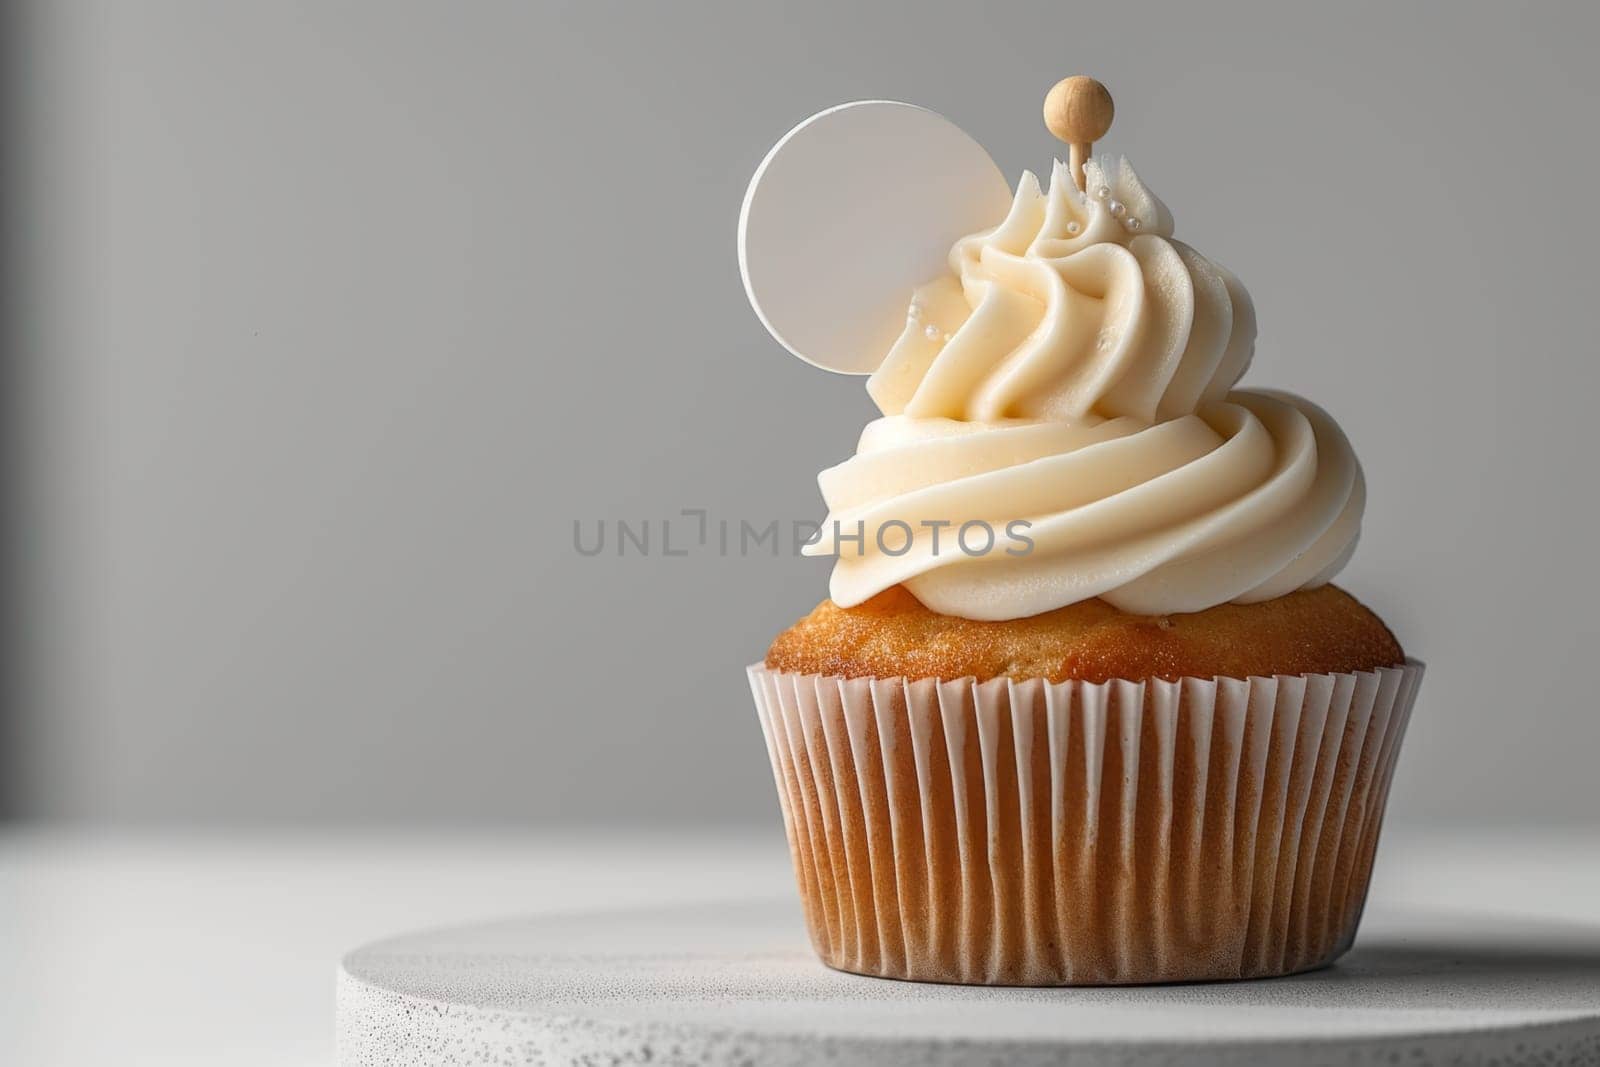 Cupcake with white cream and an inscription plate on a white background.